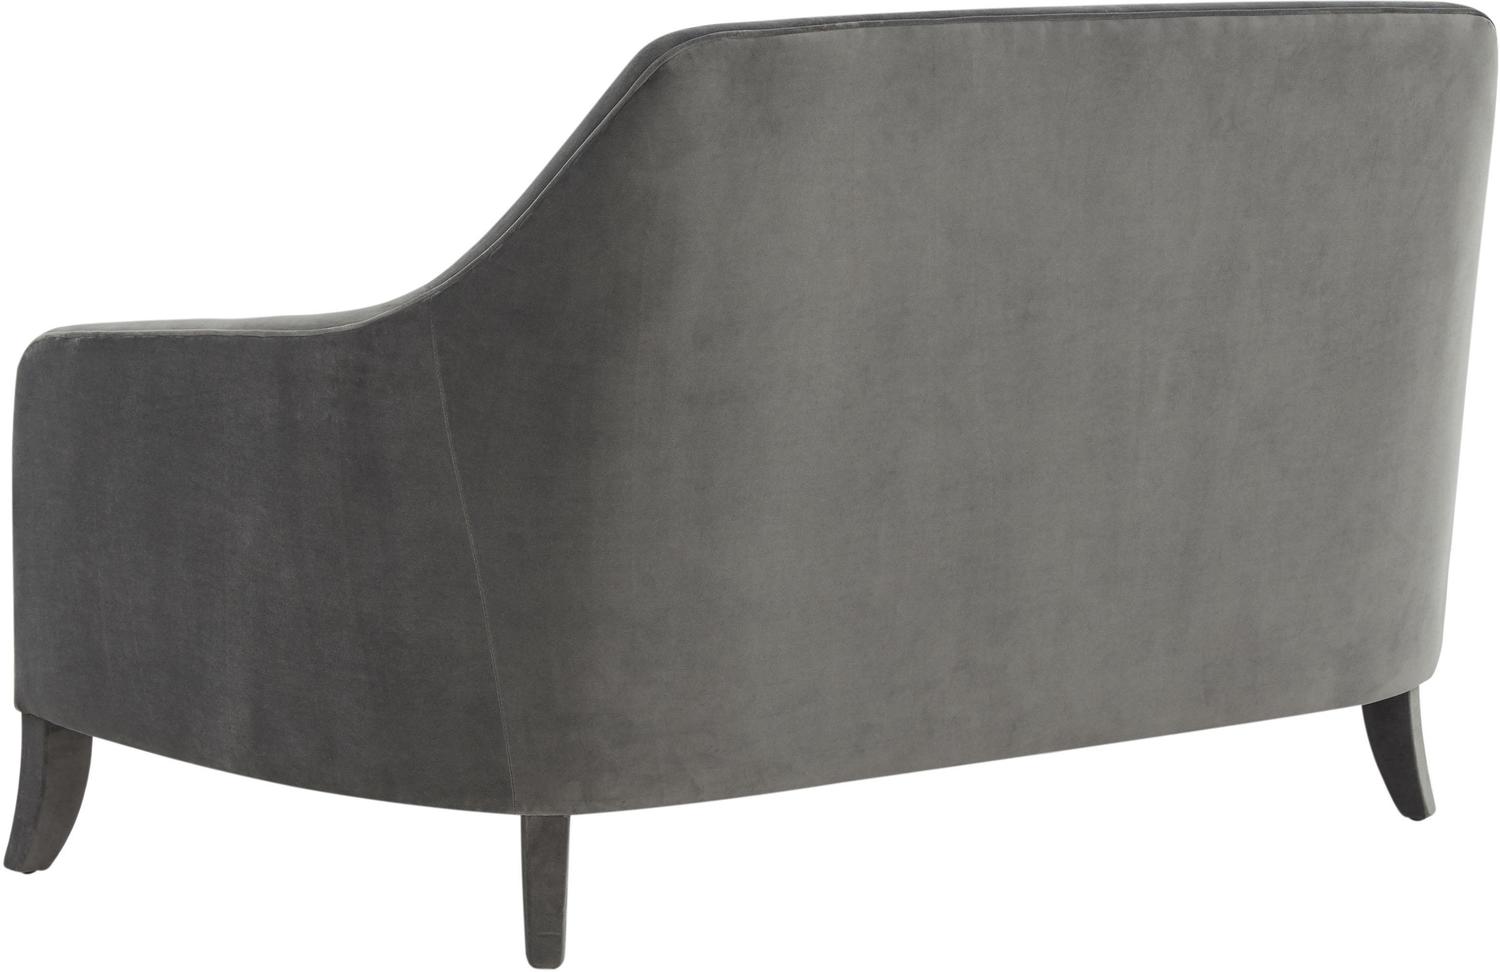 sectional convertible couch Contemporary Design Furniture Loveseats Grey